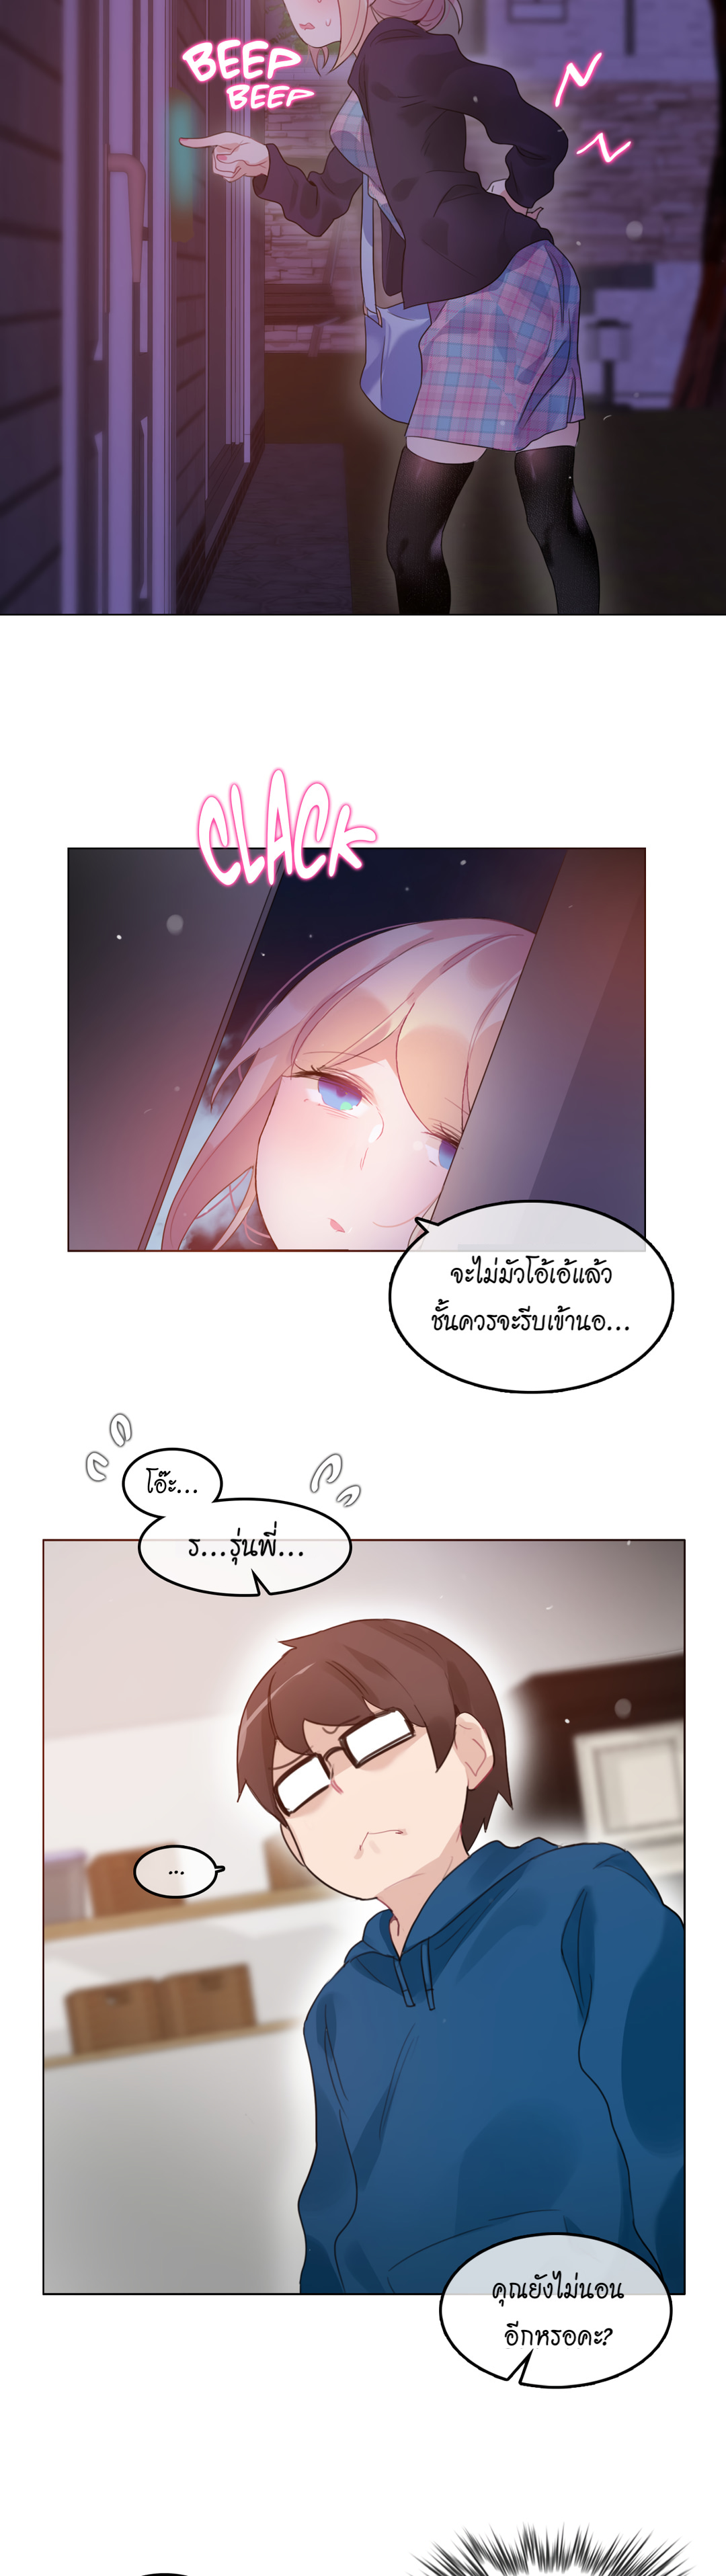 A Pervert’s Daily Life53 (17)